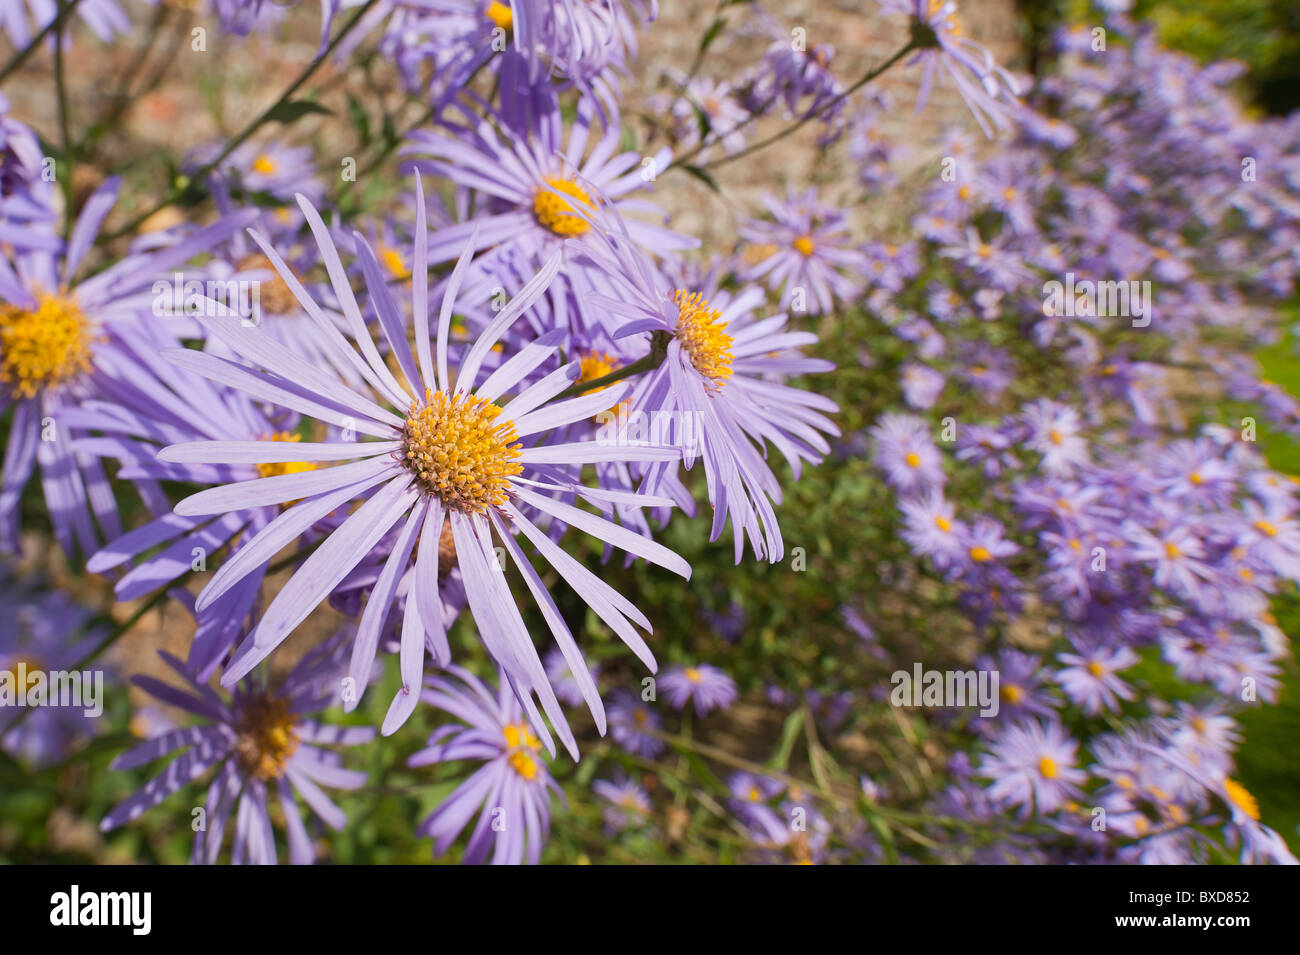 Mauve Asters X Frikartii Monch Frikart's aster lots of flowers Stock Photo